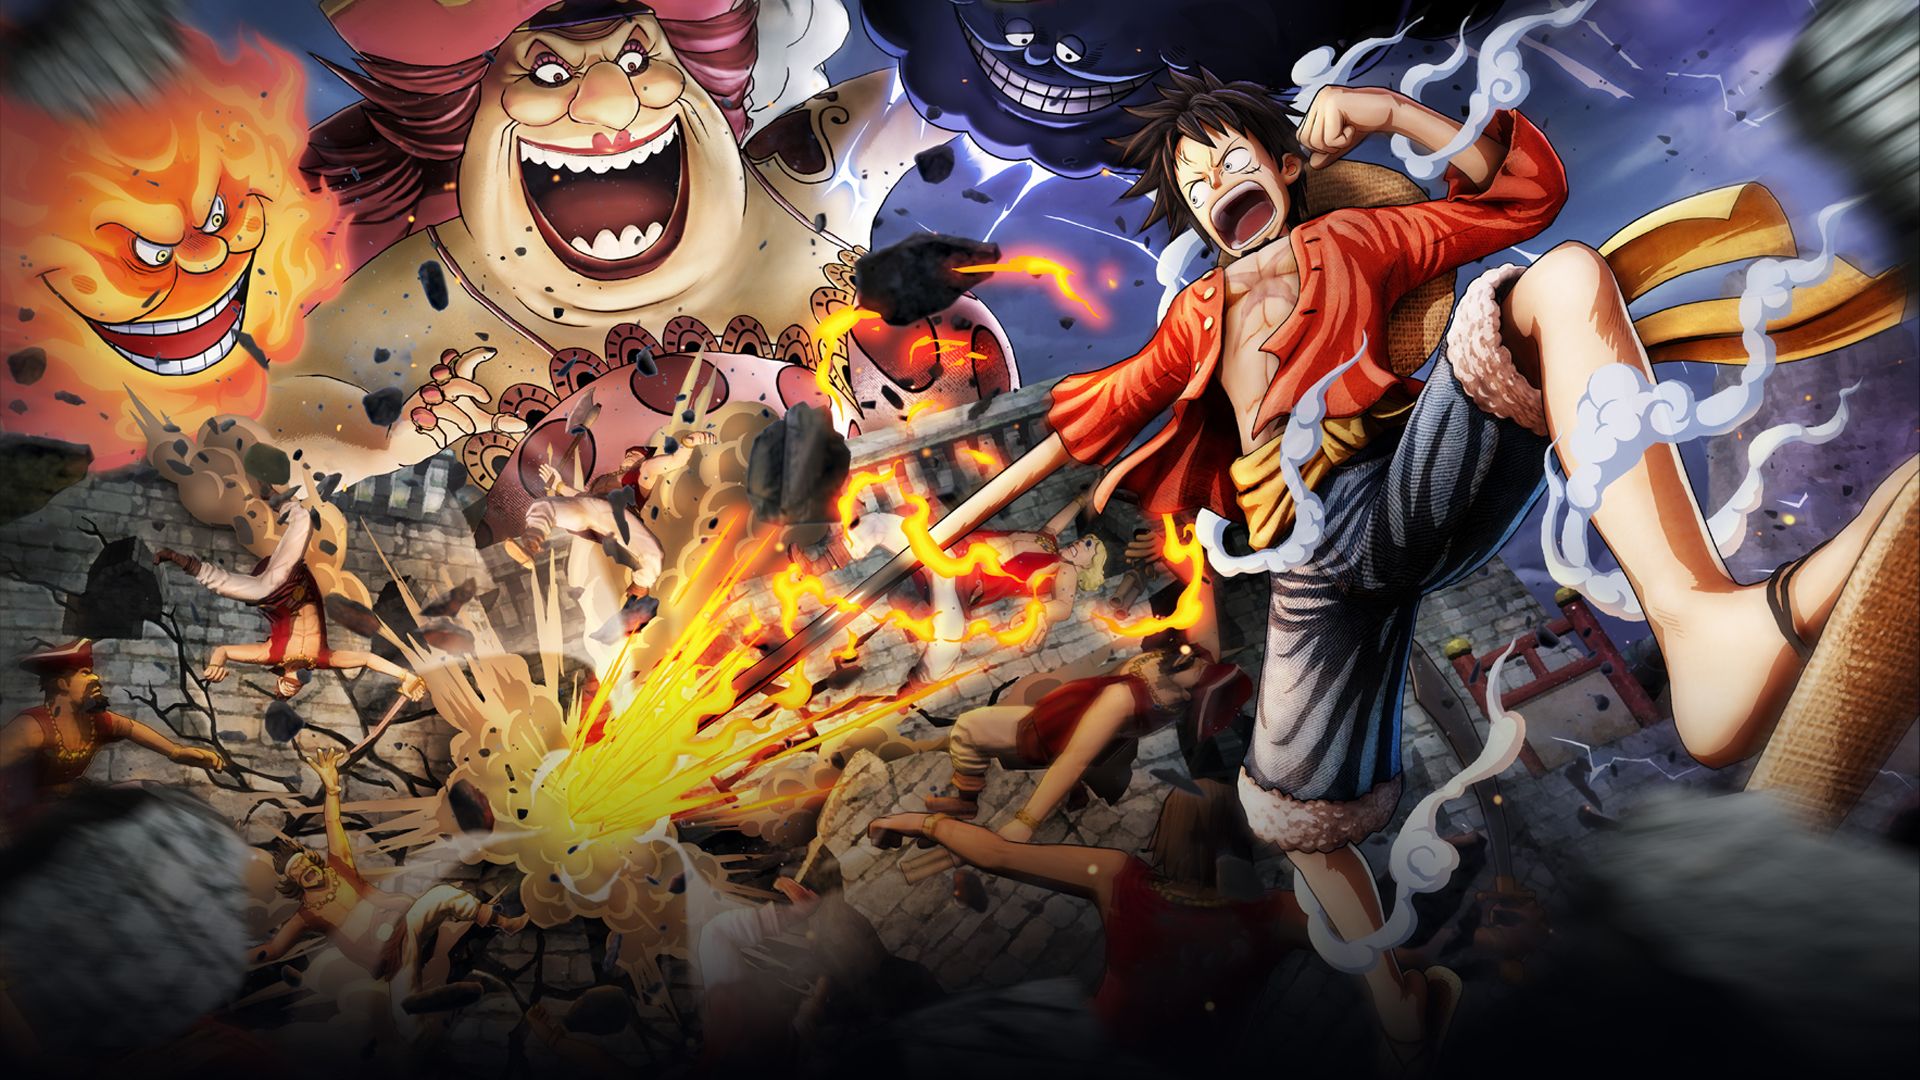 Wano Country Arc Wallpapers - Wallpaper Cave